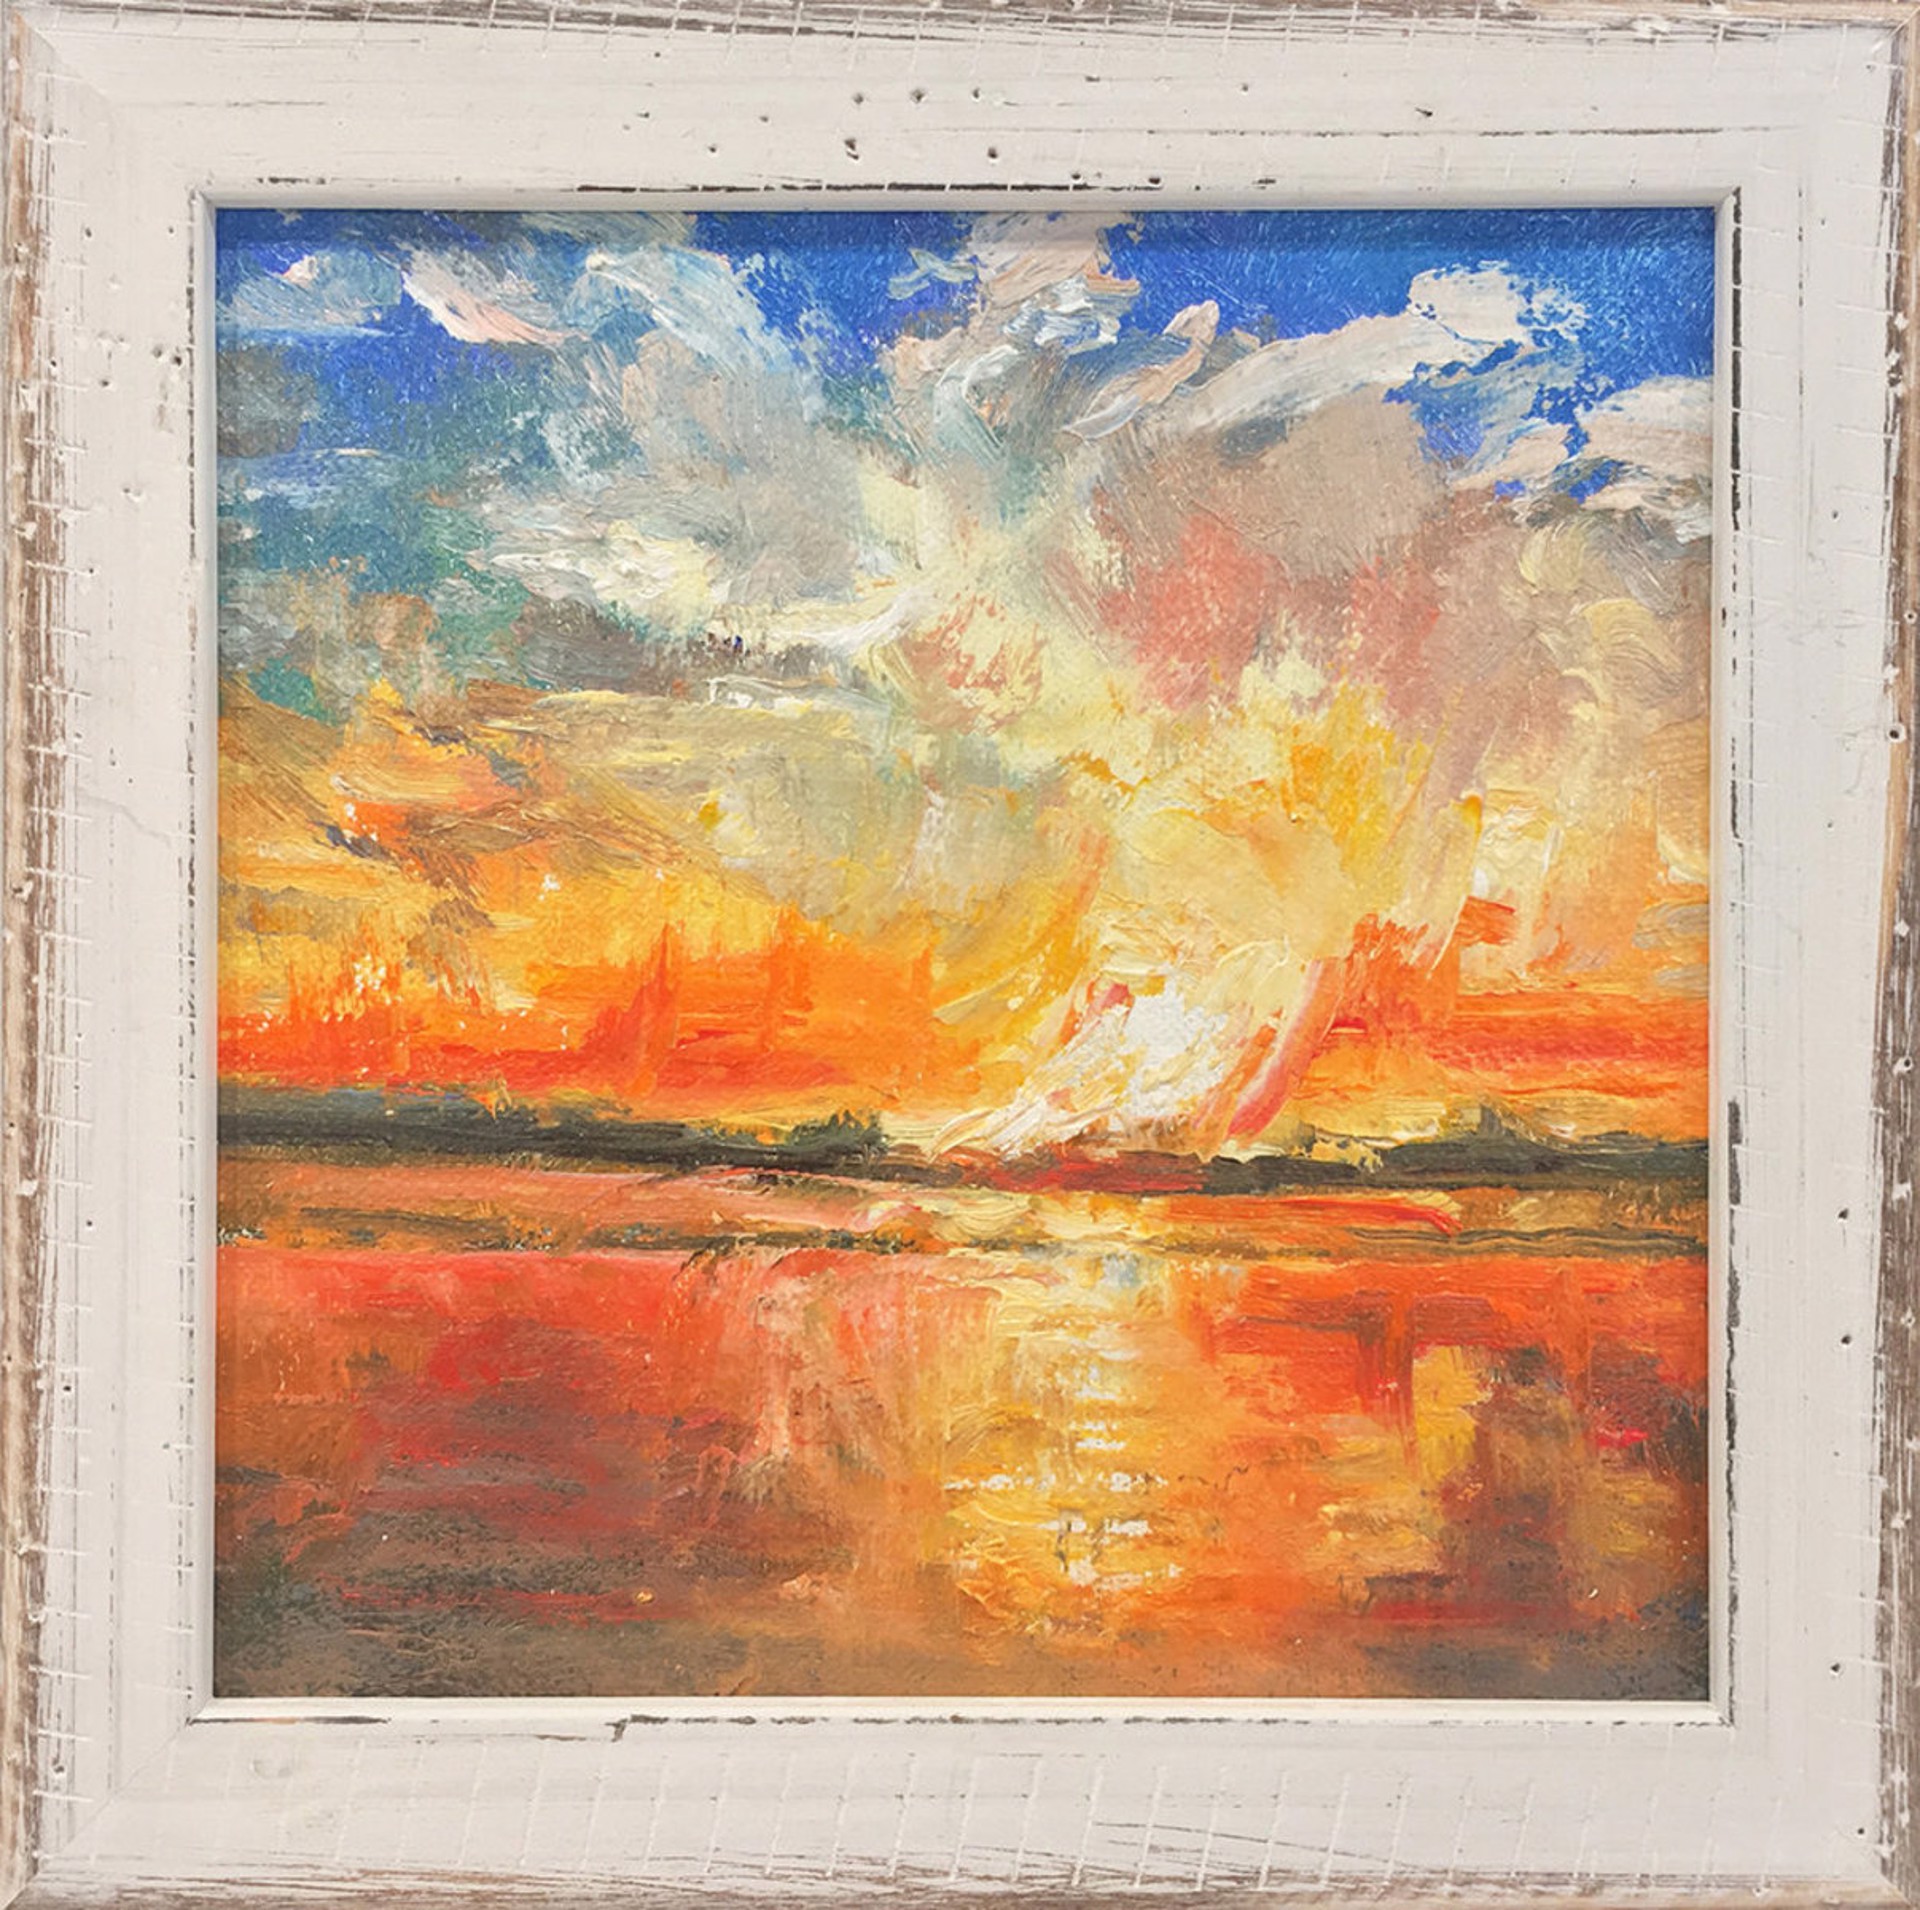 Brilliant Sunset (L552) by Joan Horsfall Young